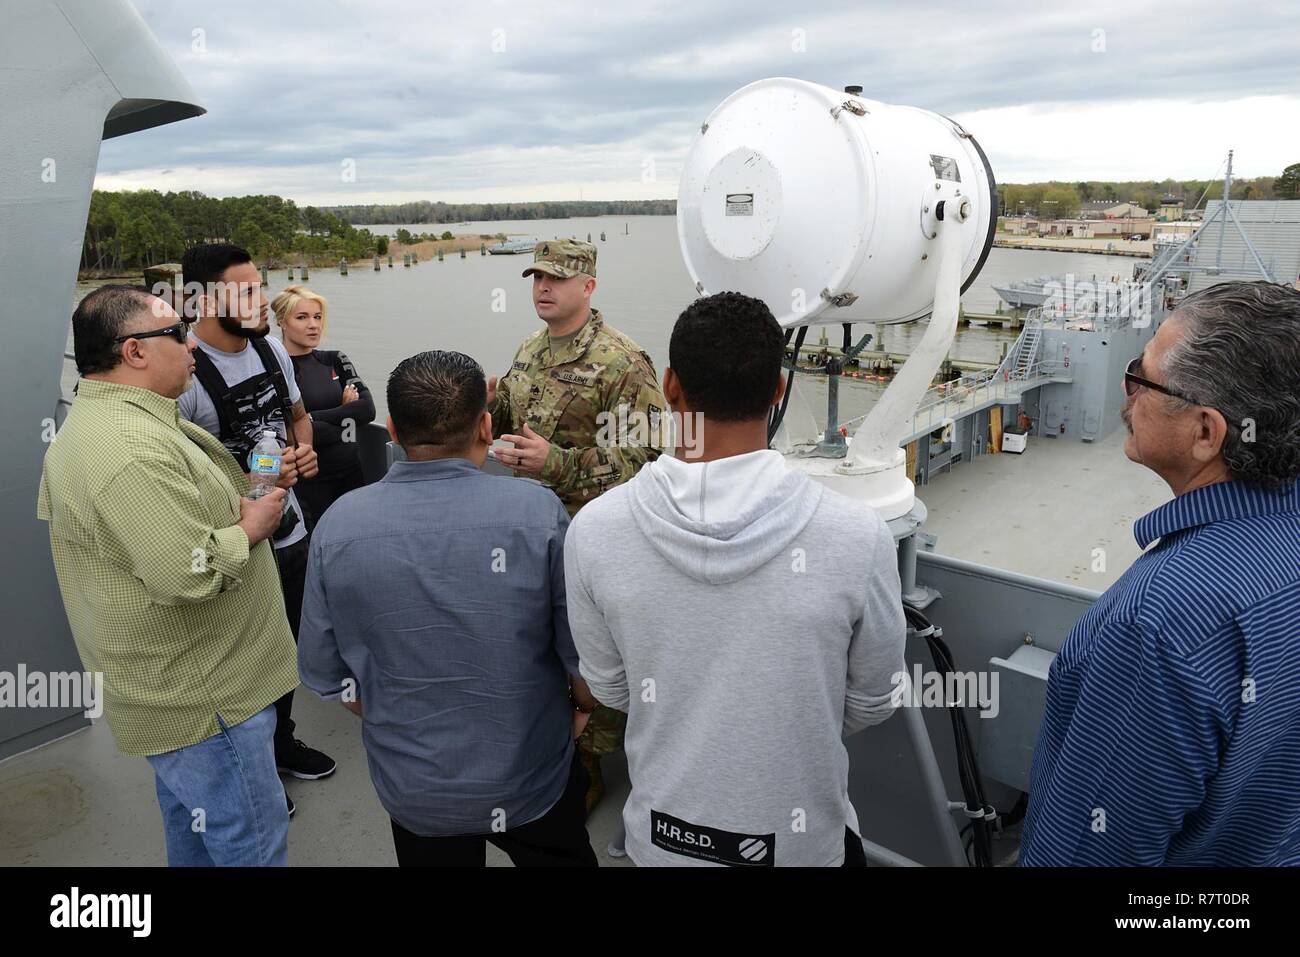 U.S. Army Staff Sgt. Ralph Genovese, 335th Transportation Detachment training NCO, guides UFC Fighters and guests on a tour of the Logistic Support Vessel Gen. Frank S. Besson Jr. at Joint Base Langley-Eustis, Va., April 6, 2017. The fighters interacted with community members during meet-and-greet events at the Fort Eustis Exchange, bowling alley and Anderson Field House. Stock Photo